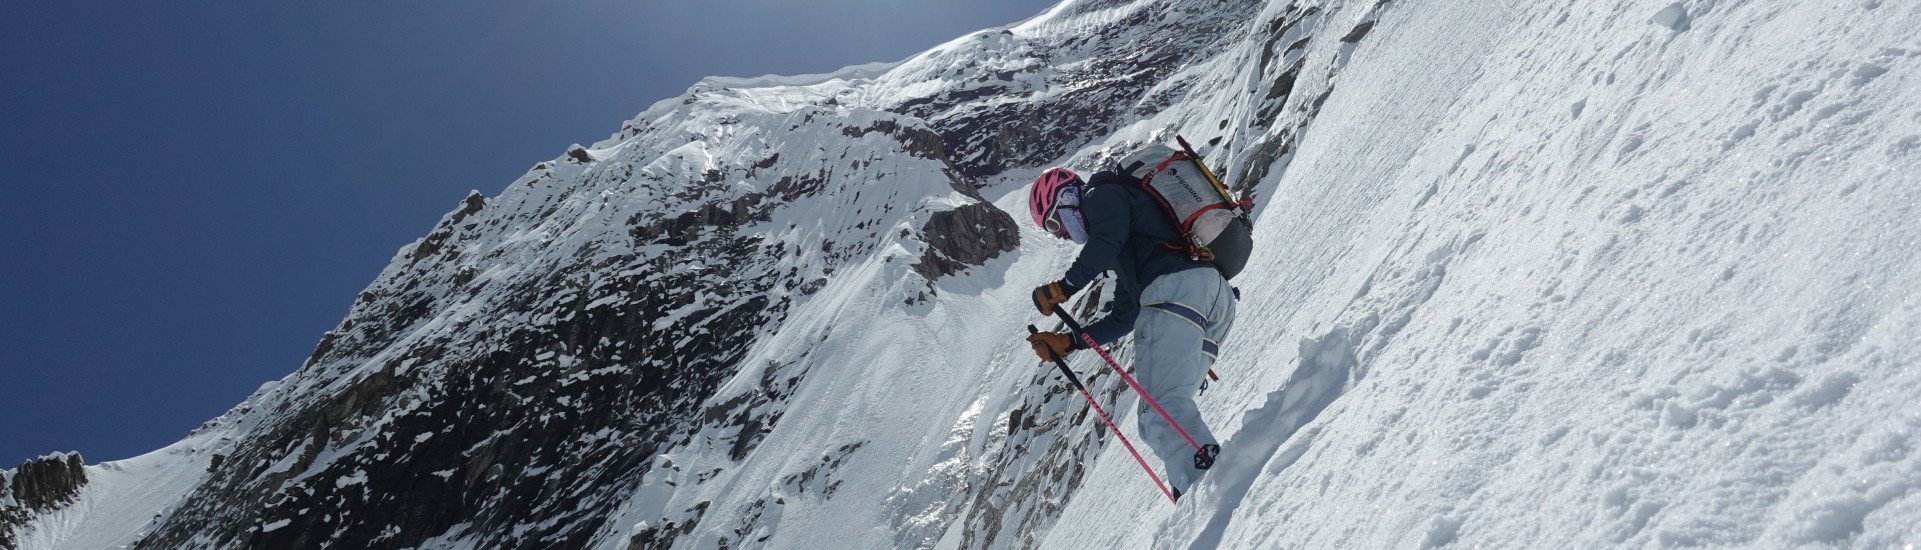 First ascent and descent on skis of an untouched peak in Pakistan for Ferrino Ambassador Enrico Mosetti